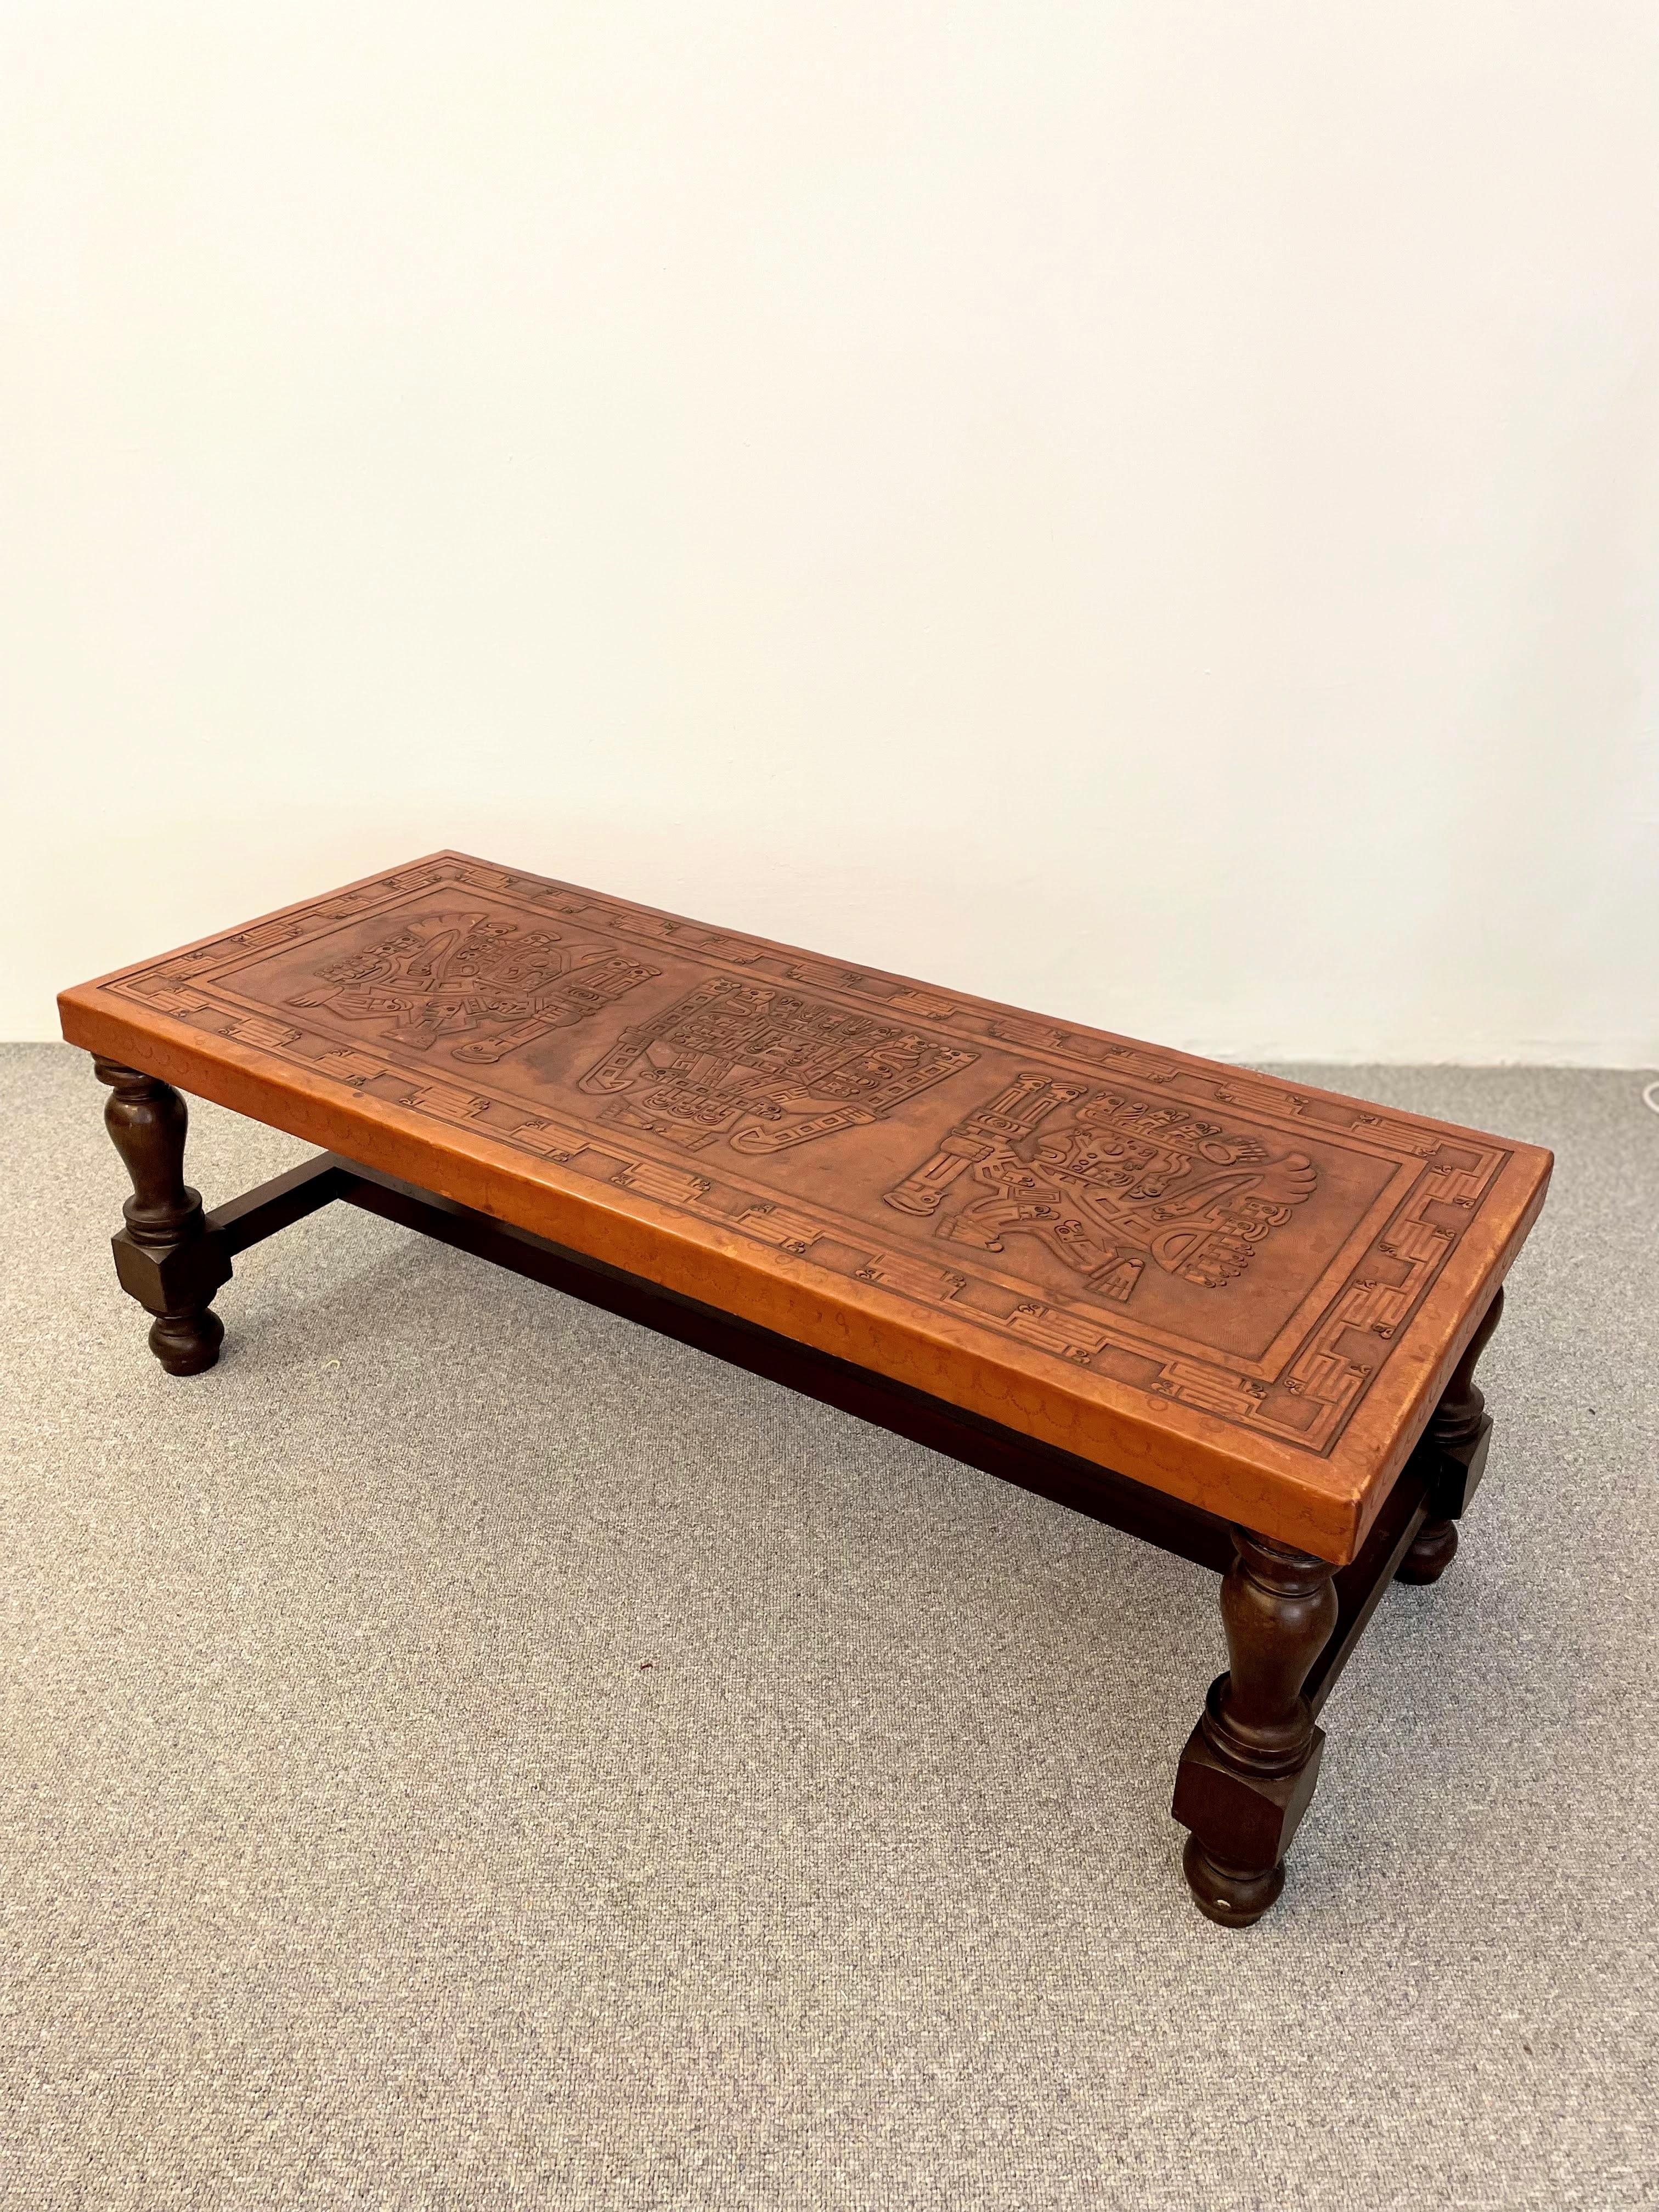 Vintage midcentury coffee table with Aztec motif on the leather top. Designed in the style of Angel Pazmino. Handmade construction in good vintage condition. The leather top has signs of wear.